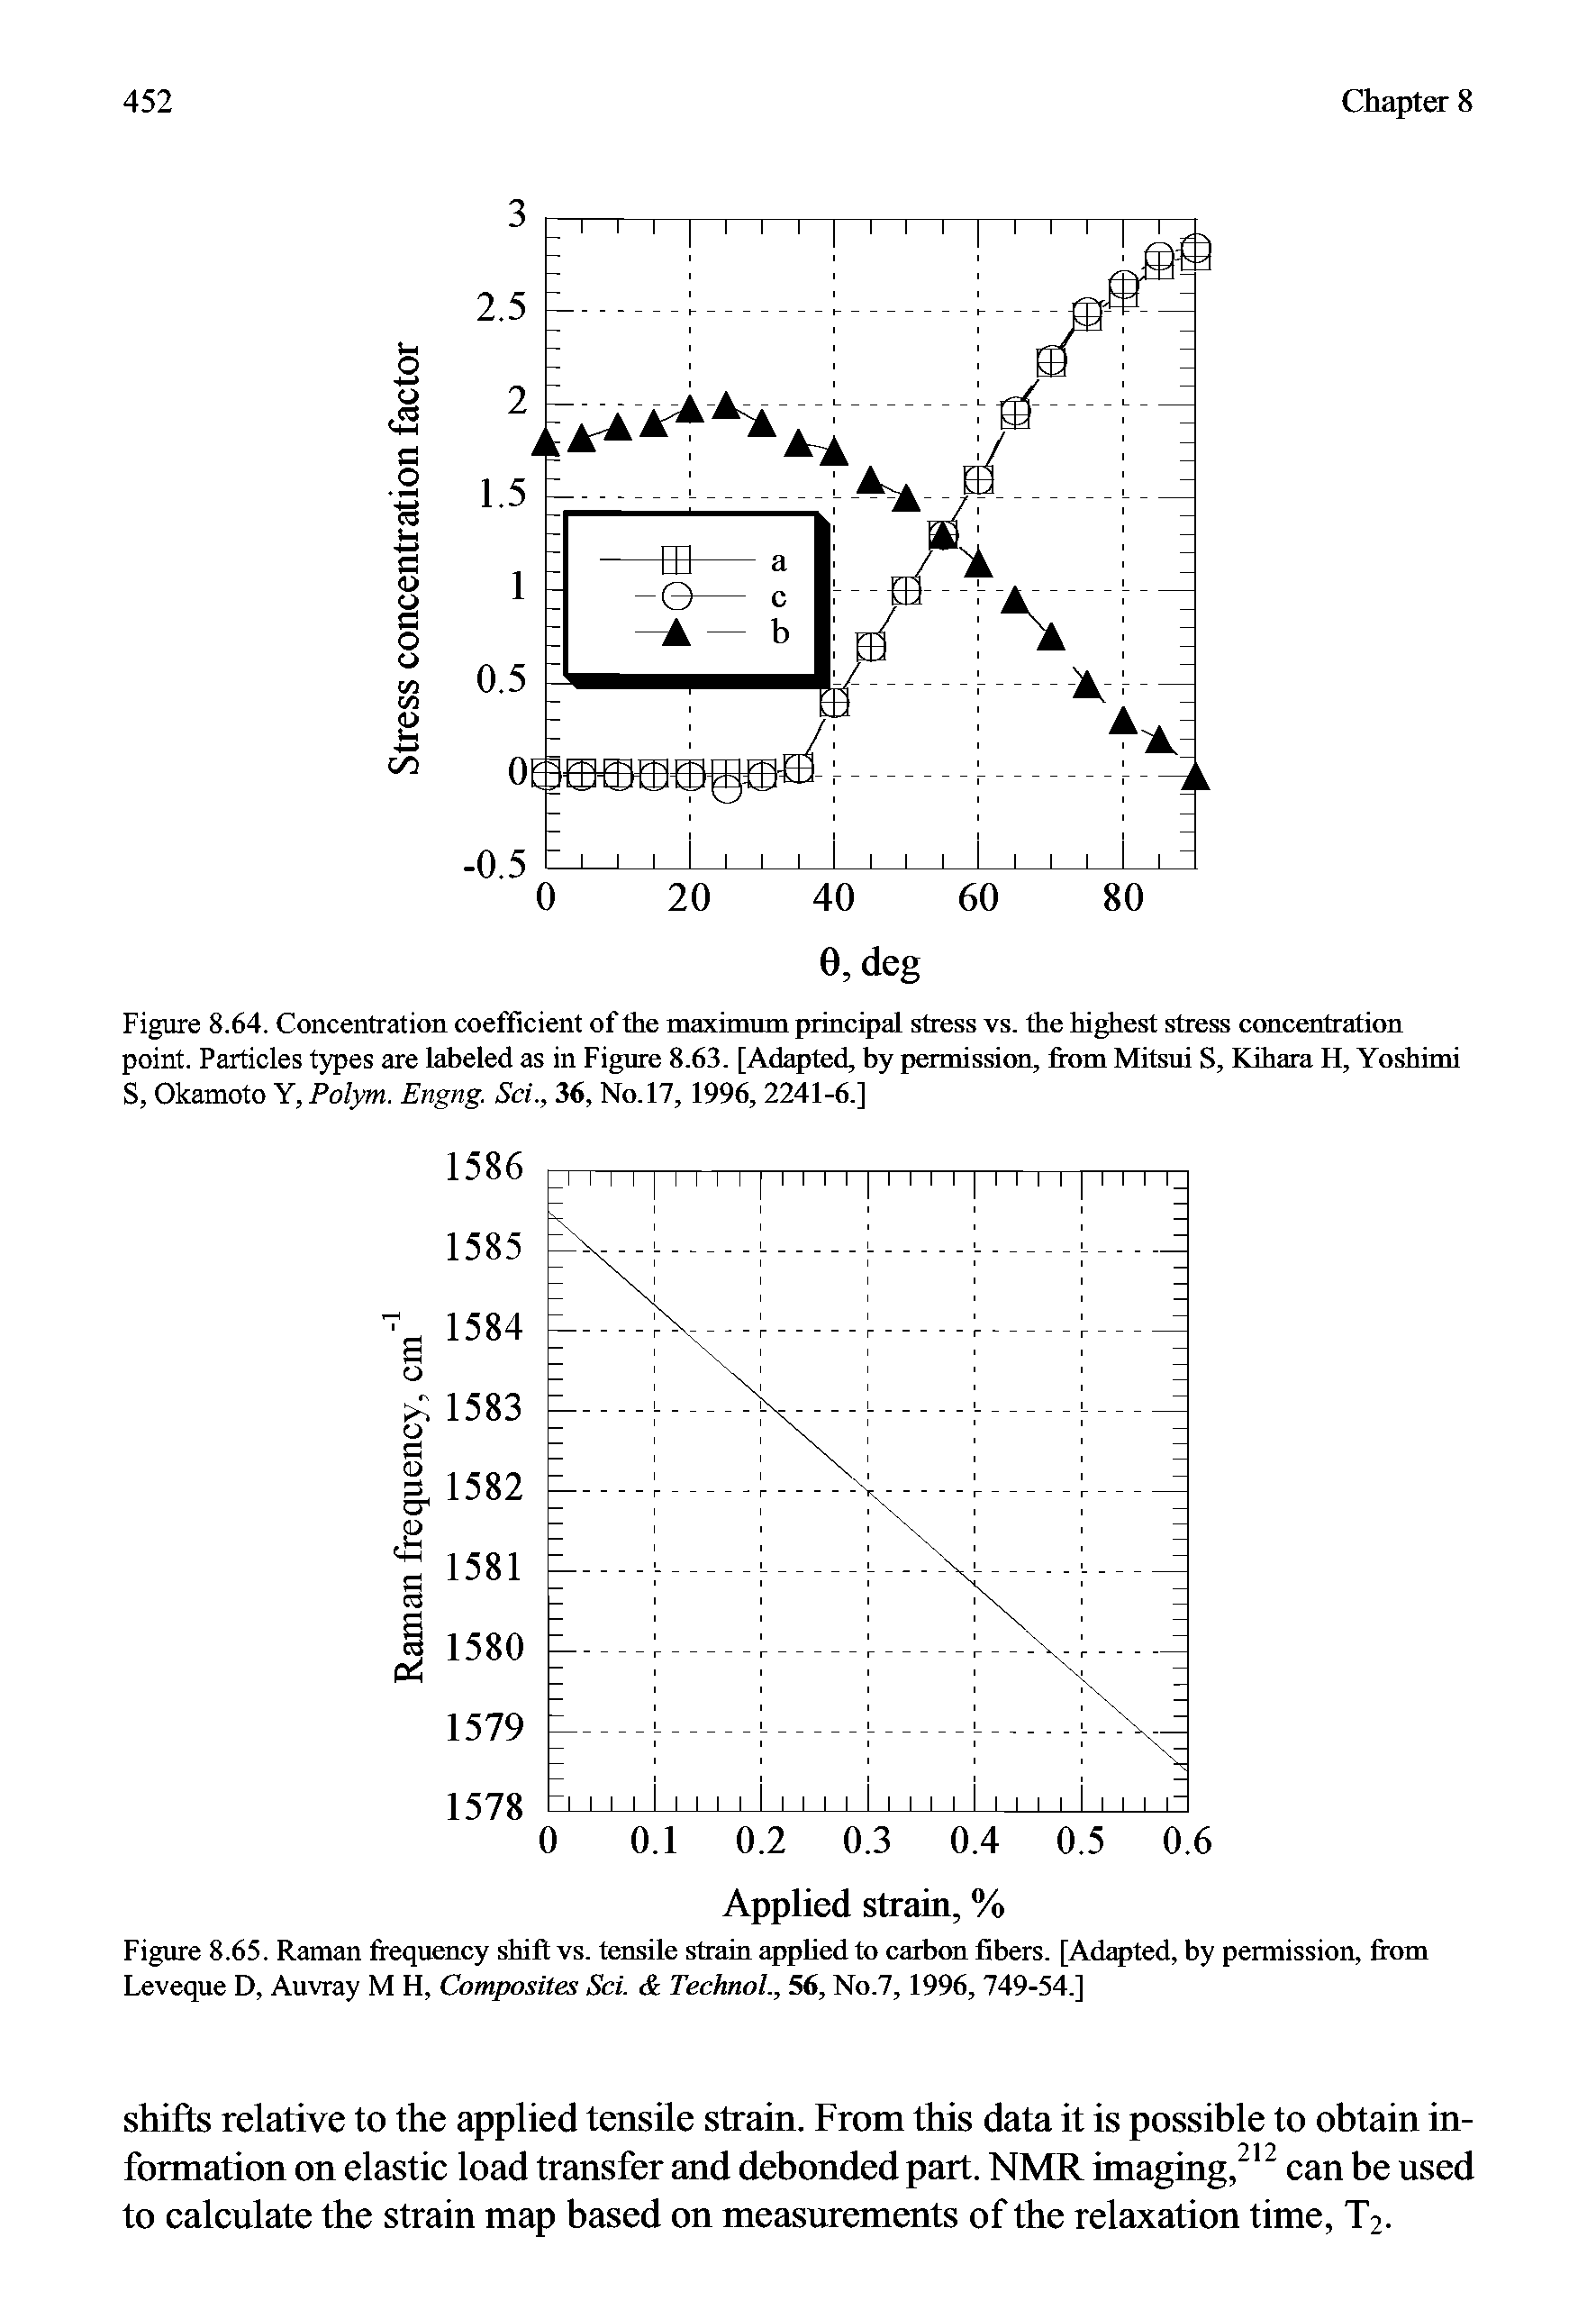 Figure 8.64. Concentration coefficient of the maximum principal stress vs. the highest stress concentration point. Particles types are labeled as in Figure 8.63. [Adapted, by permission, from Mitsui S, Kihara H, Yoshimi S, Okamoto Y, Polym. Engng. Sci., 36, No. 17, 1996, 2241-6.]...